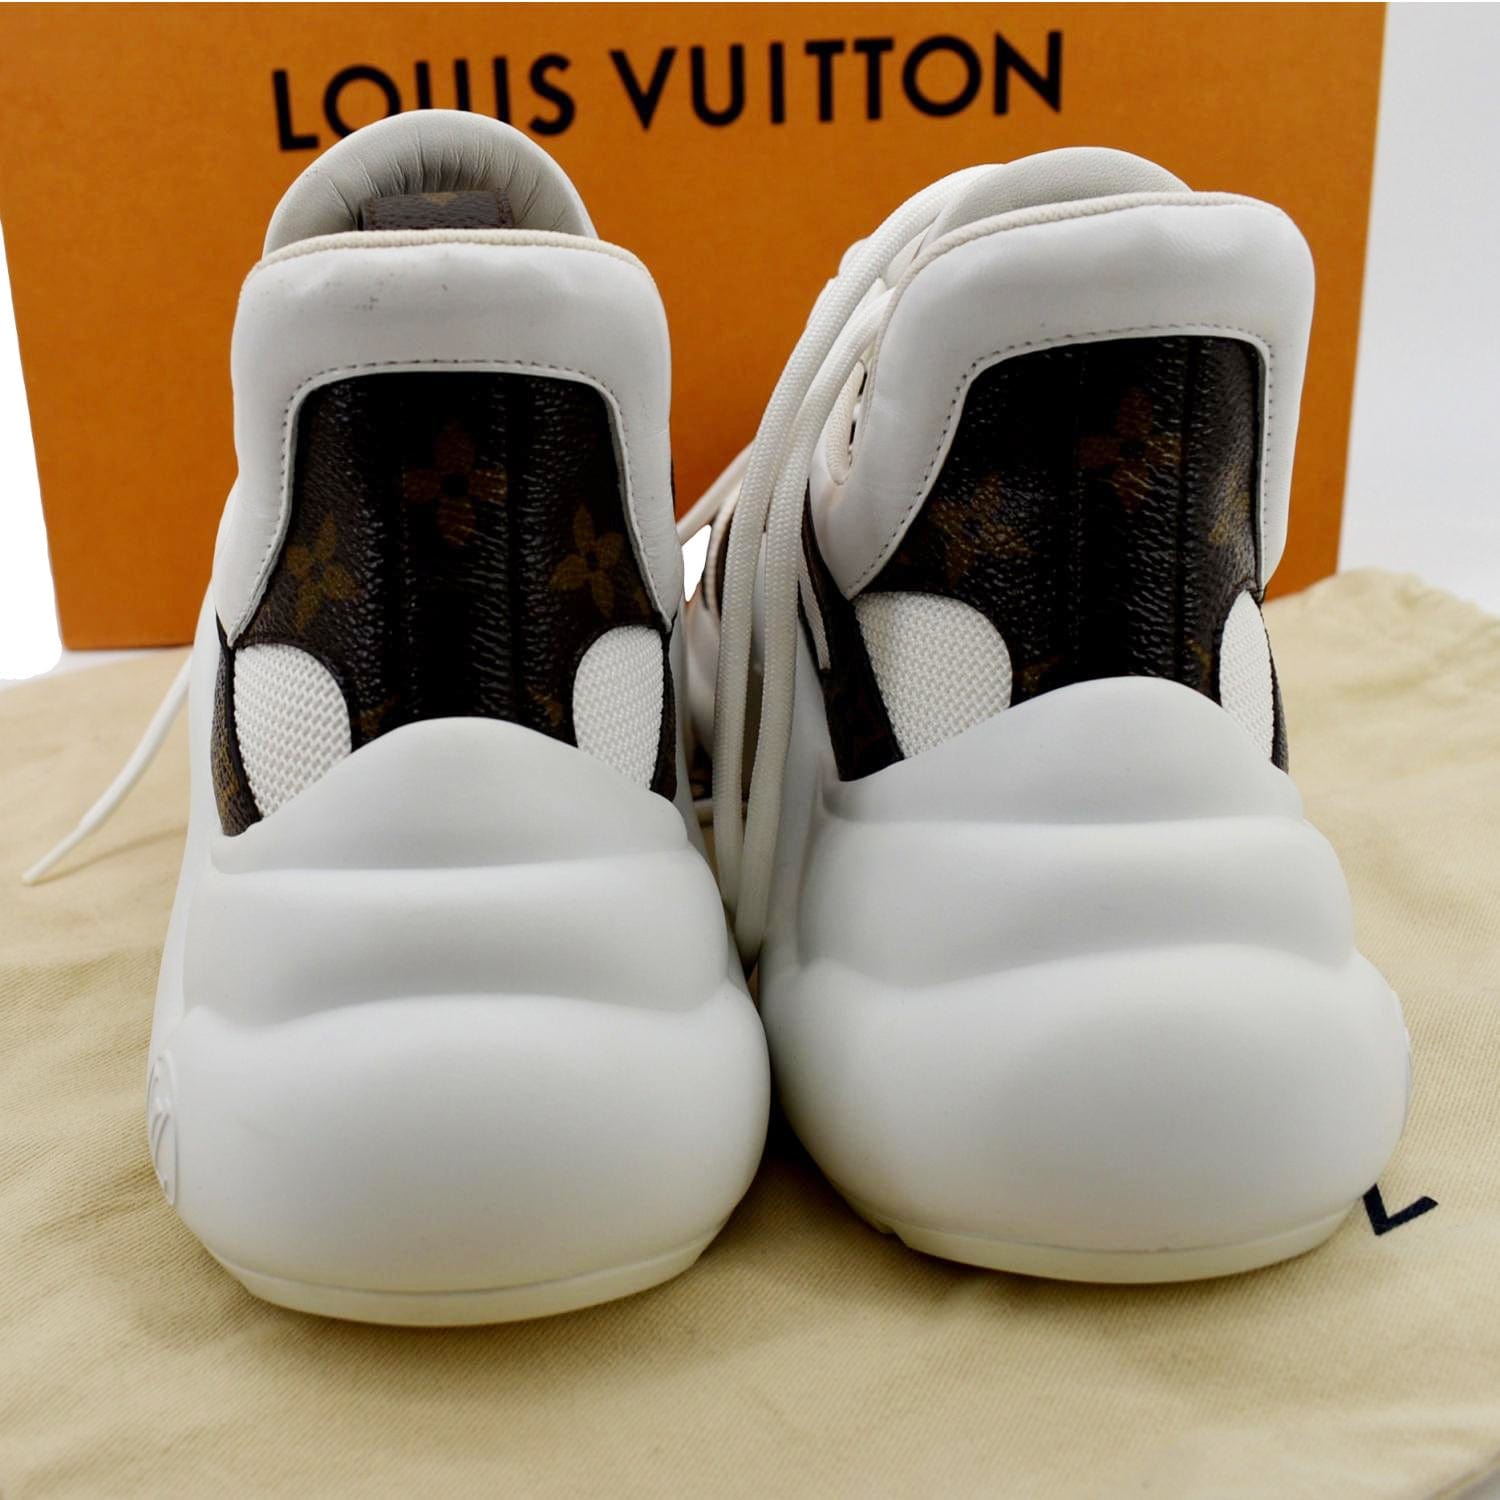 Louis Vuitton Archlight Sneakers - Current Season / Sold Out SIZE